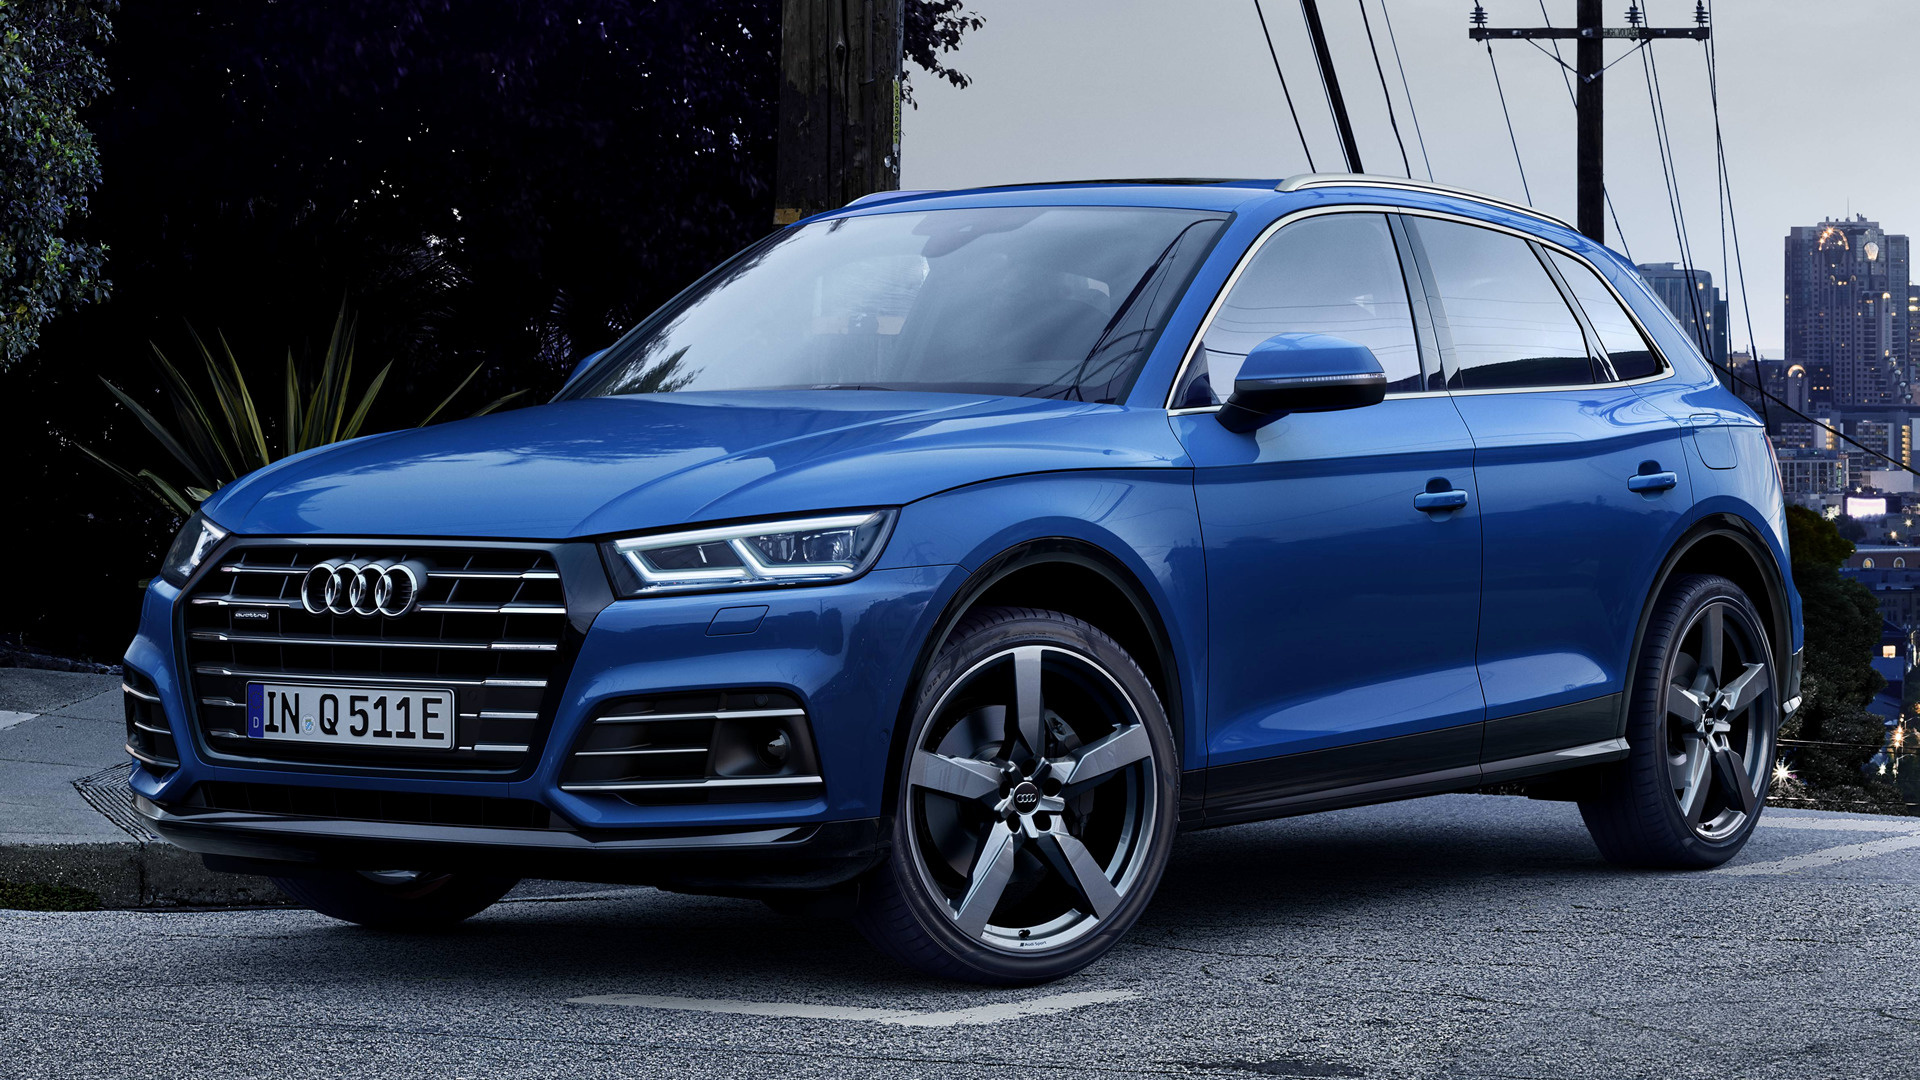 2019 Audi Q5 Plug-In Hybrid S line - Wallpapers and HD Images | Car Pixel